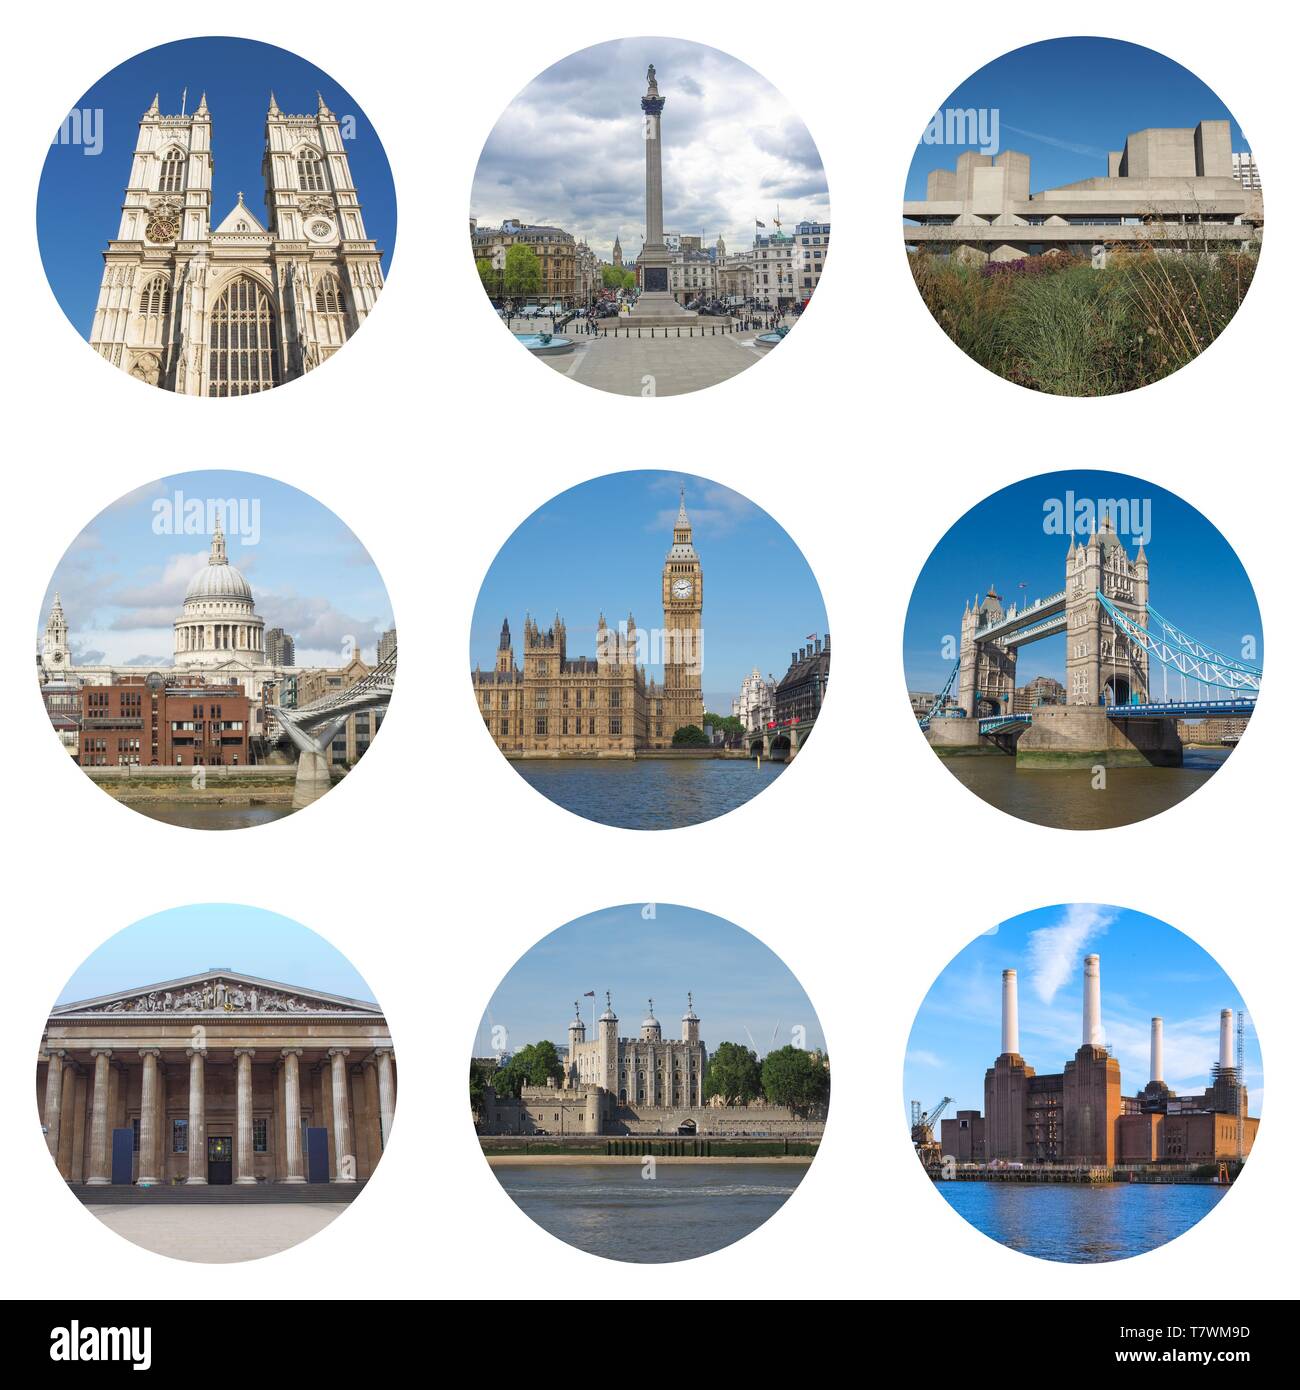 London collage with Westminster Abbey, Trafalgar Square, National Theatre, Saint Paul's Cathedral, Houses of Parliament, Big Ben, Tower Bridge, Britis Stock Photo